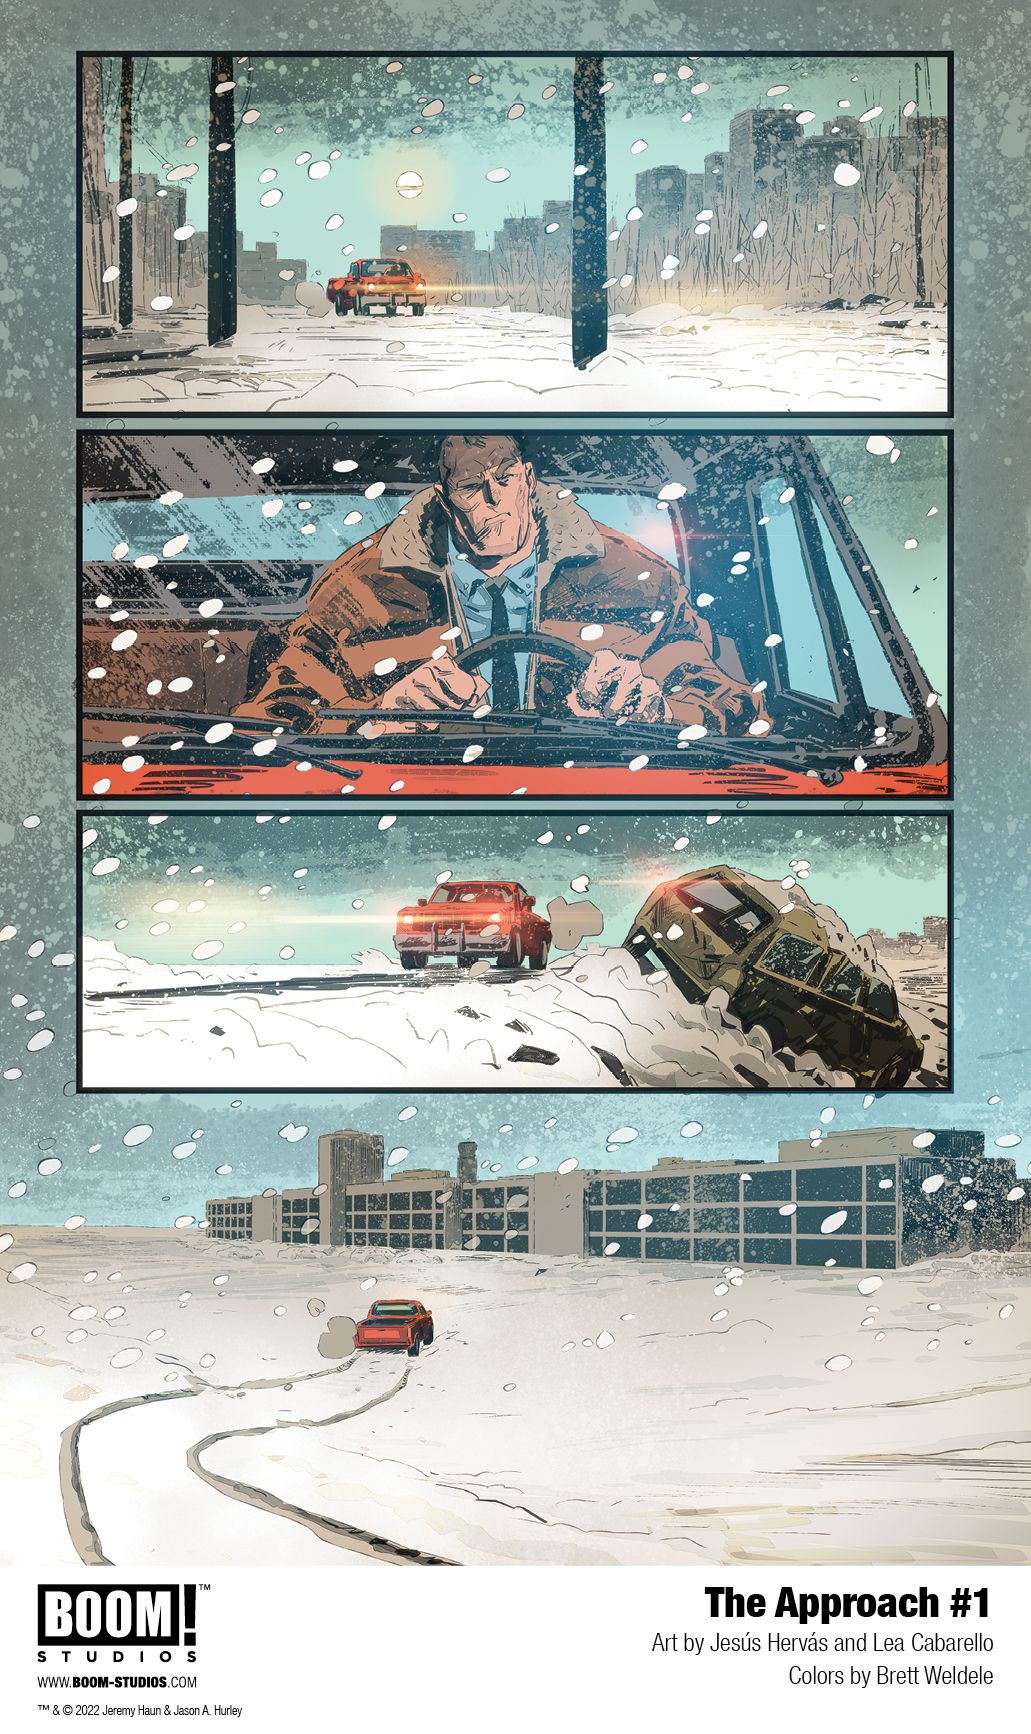 THE APPROACH #1 From BOOM! Studios